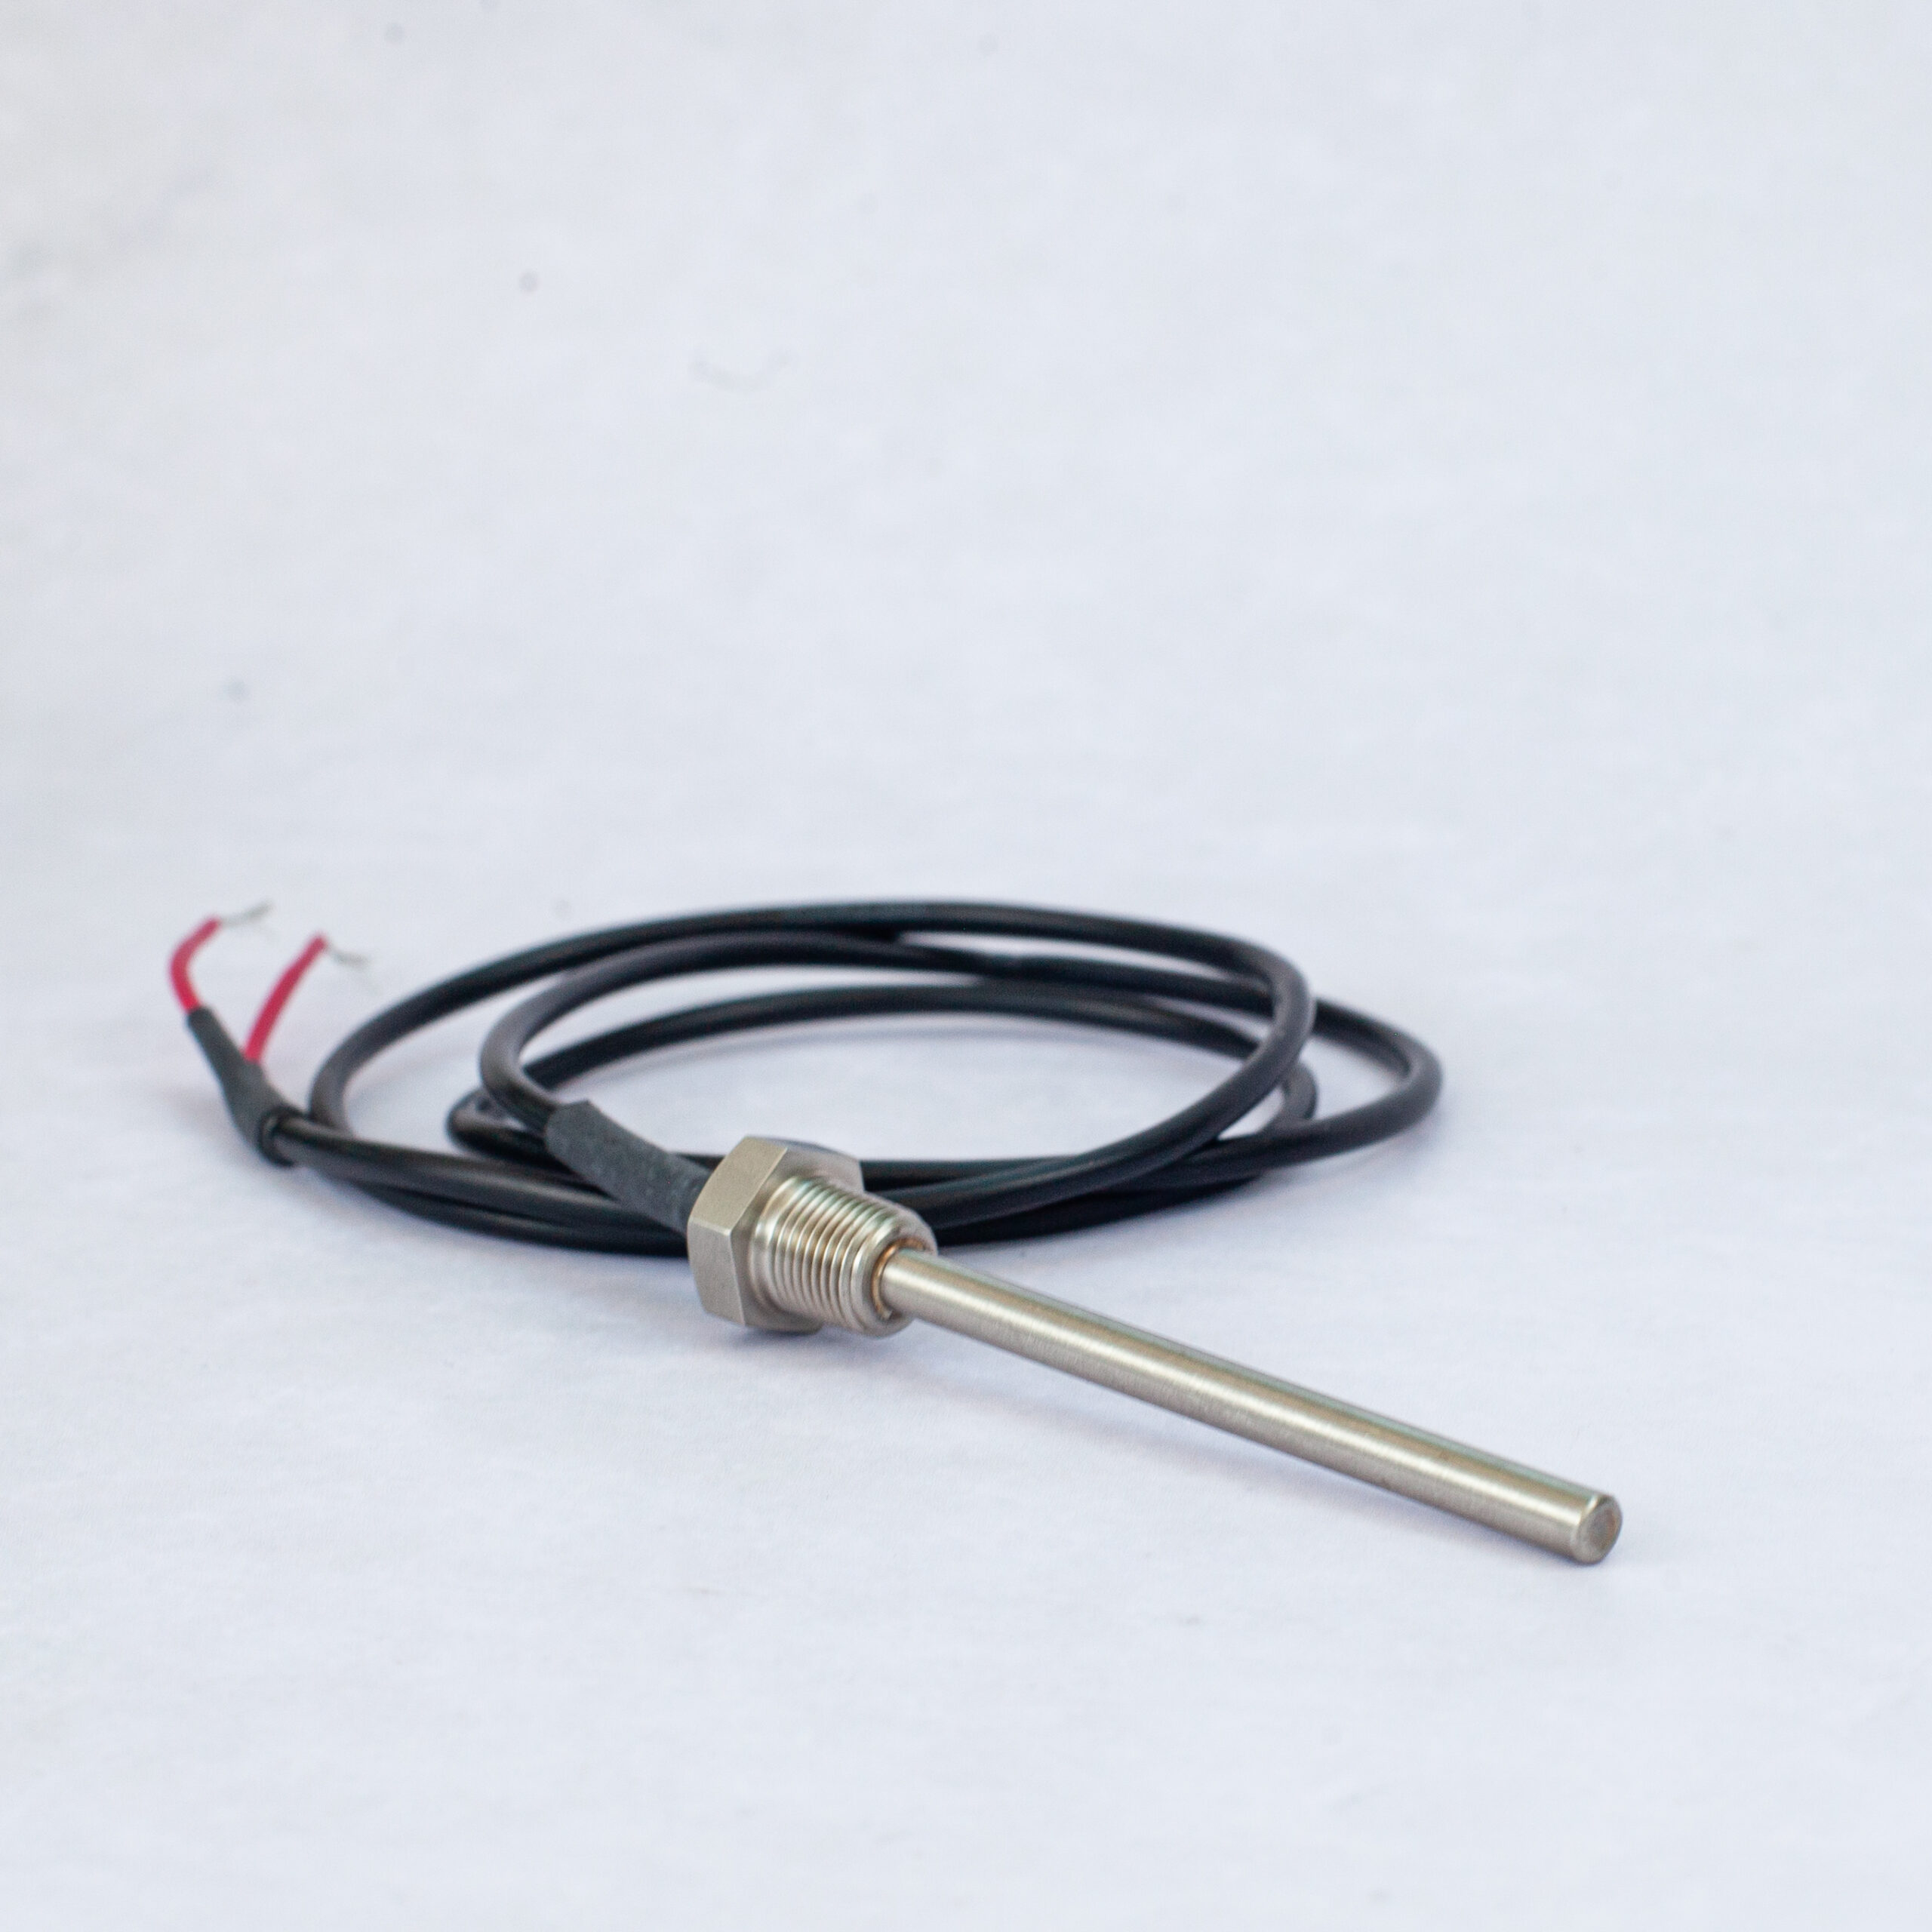 https://www.processparameters.co.uk/wp-content/uploads/2020/04/Thermocouple-with-Process-Thread-and-Flying-Lead-PPL2-T-scaled.jpg